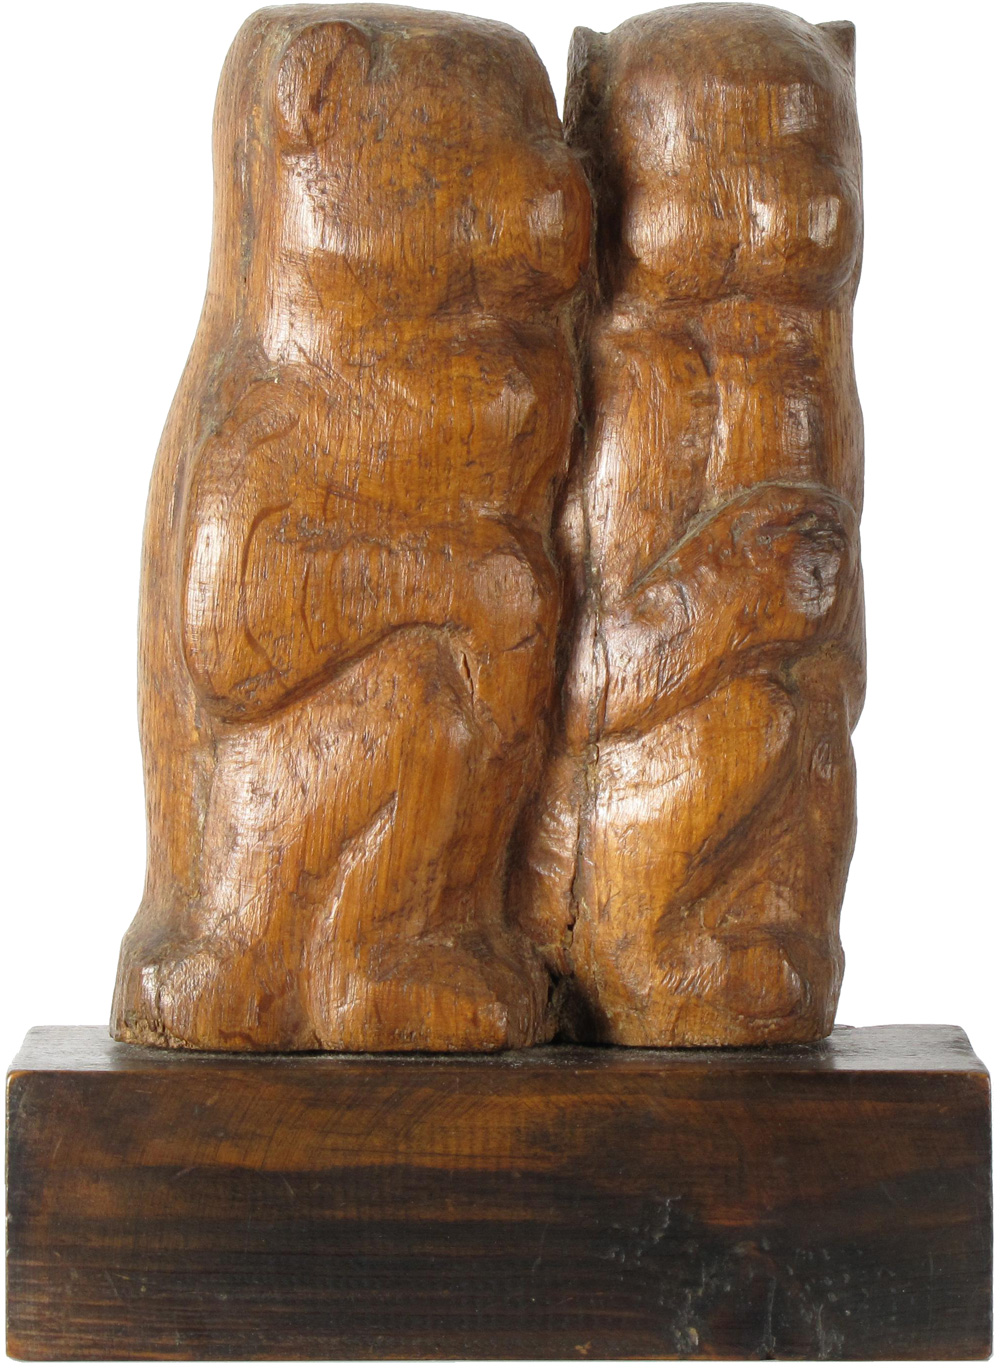 Joseph Constant - Wood Engraved Sculpture - Two Monkeys - יוסף קונסטנט - פסל עץ - Back To List of Original Paintings and Sculptures